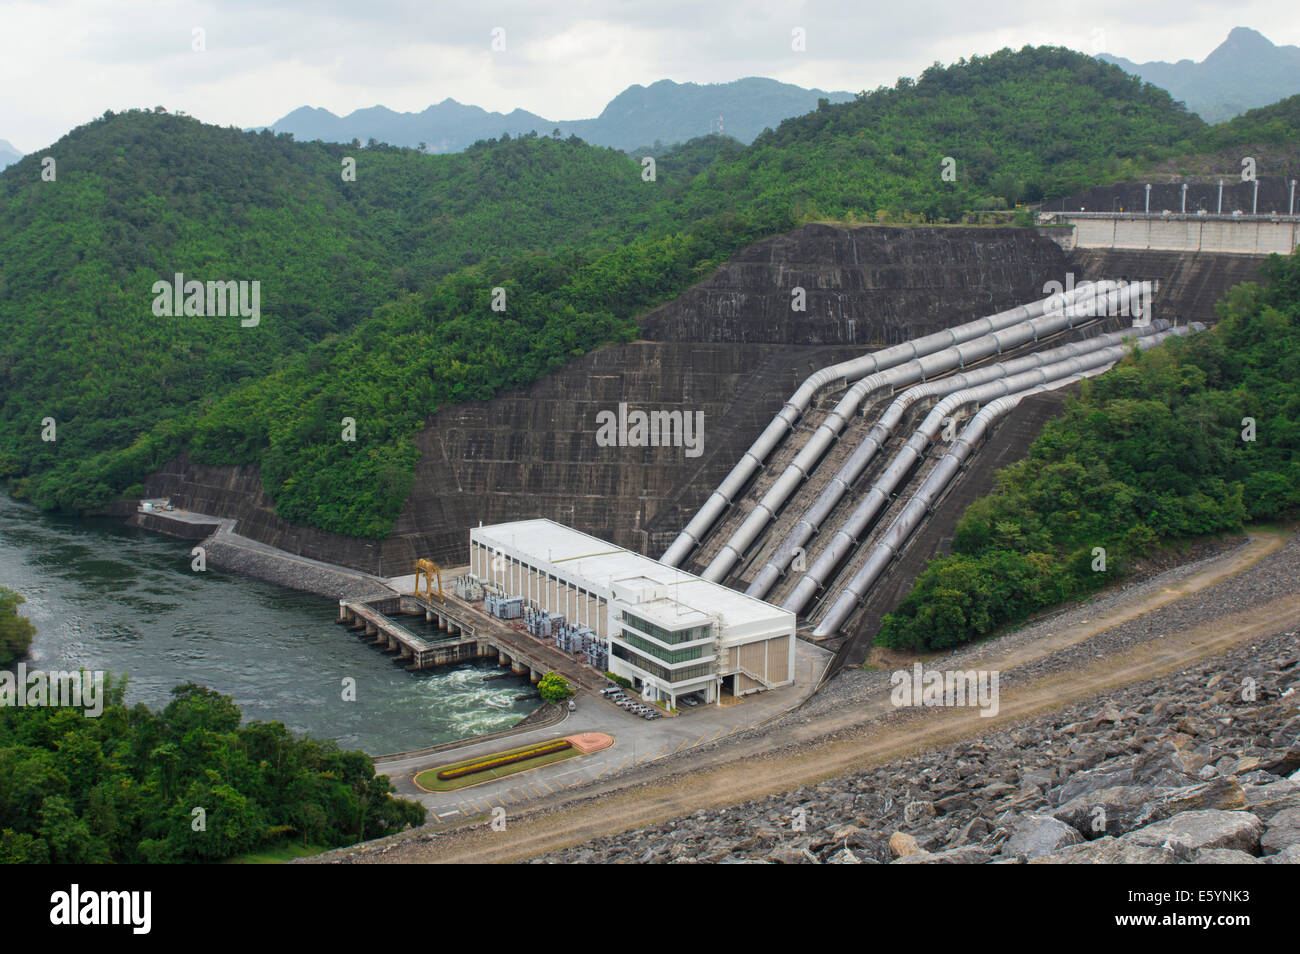 Hydroelectric power station Stock Photo